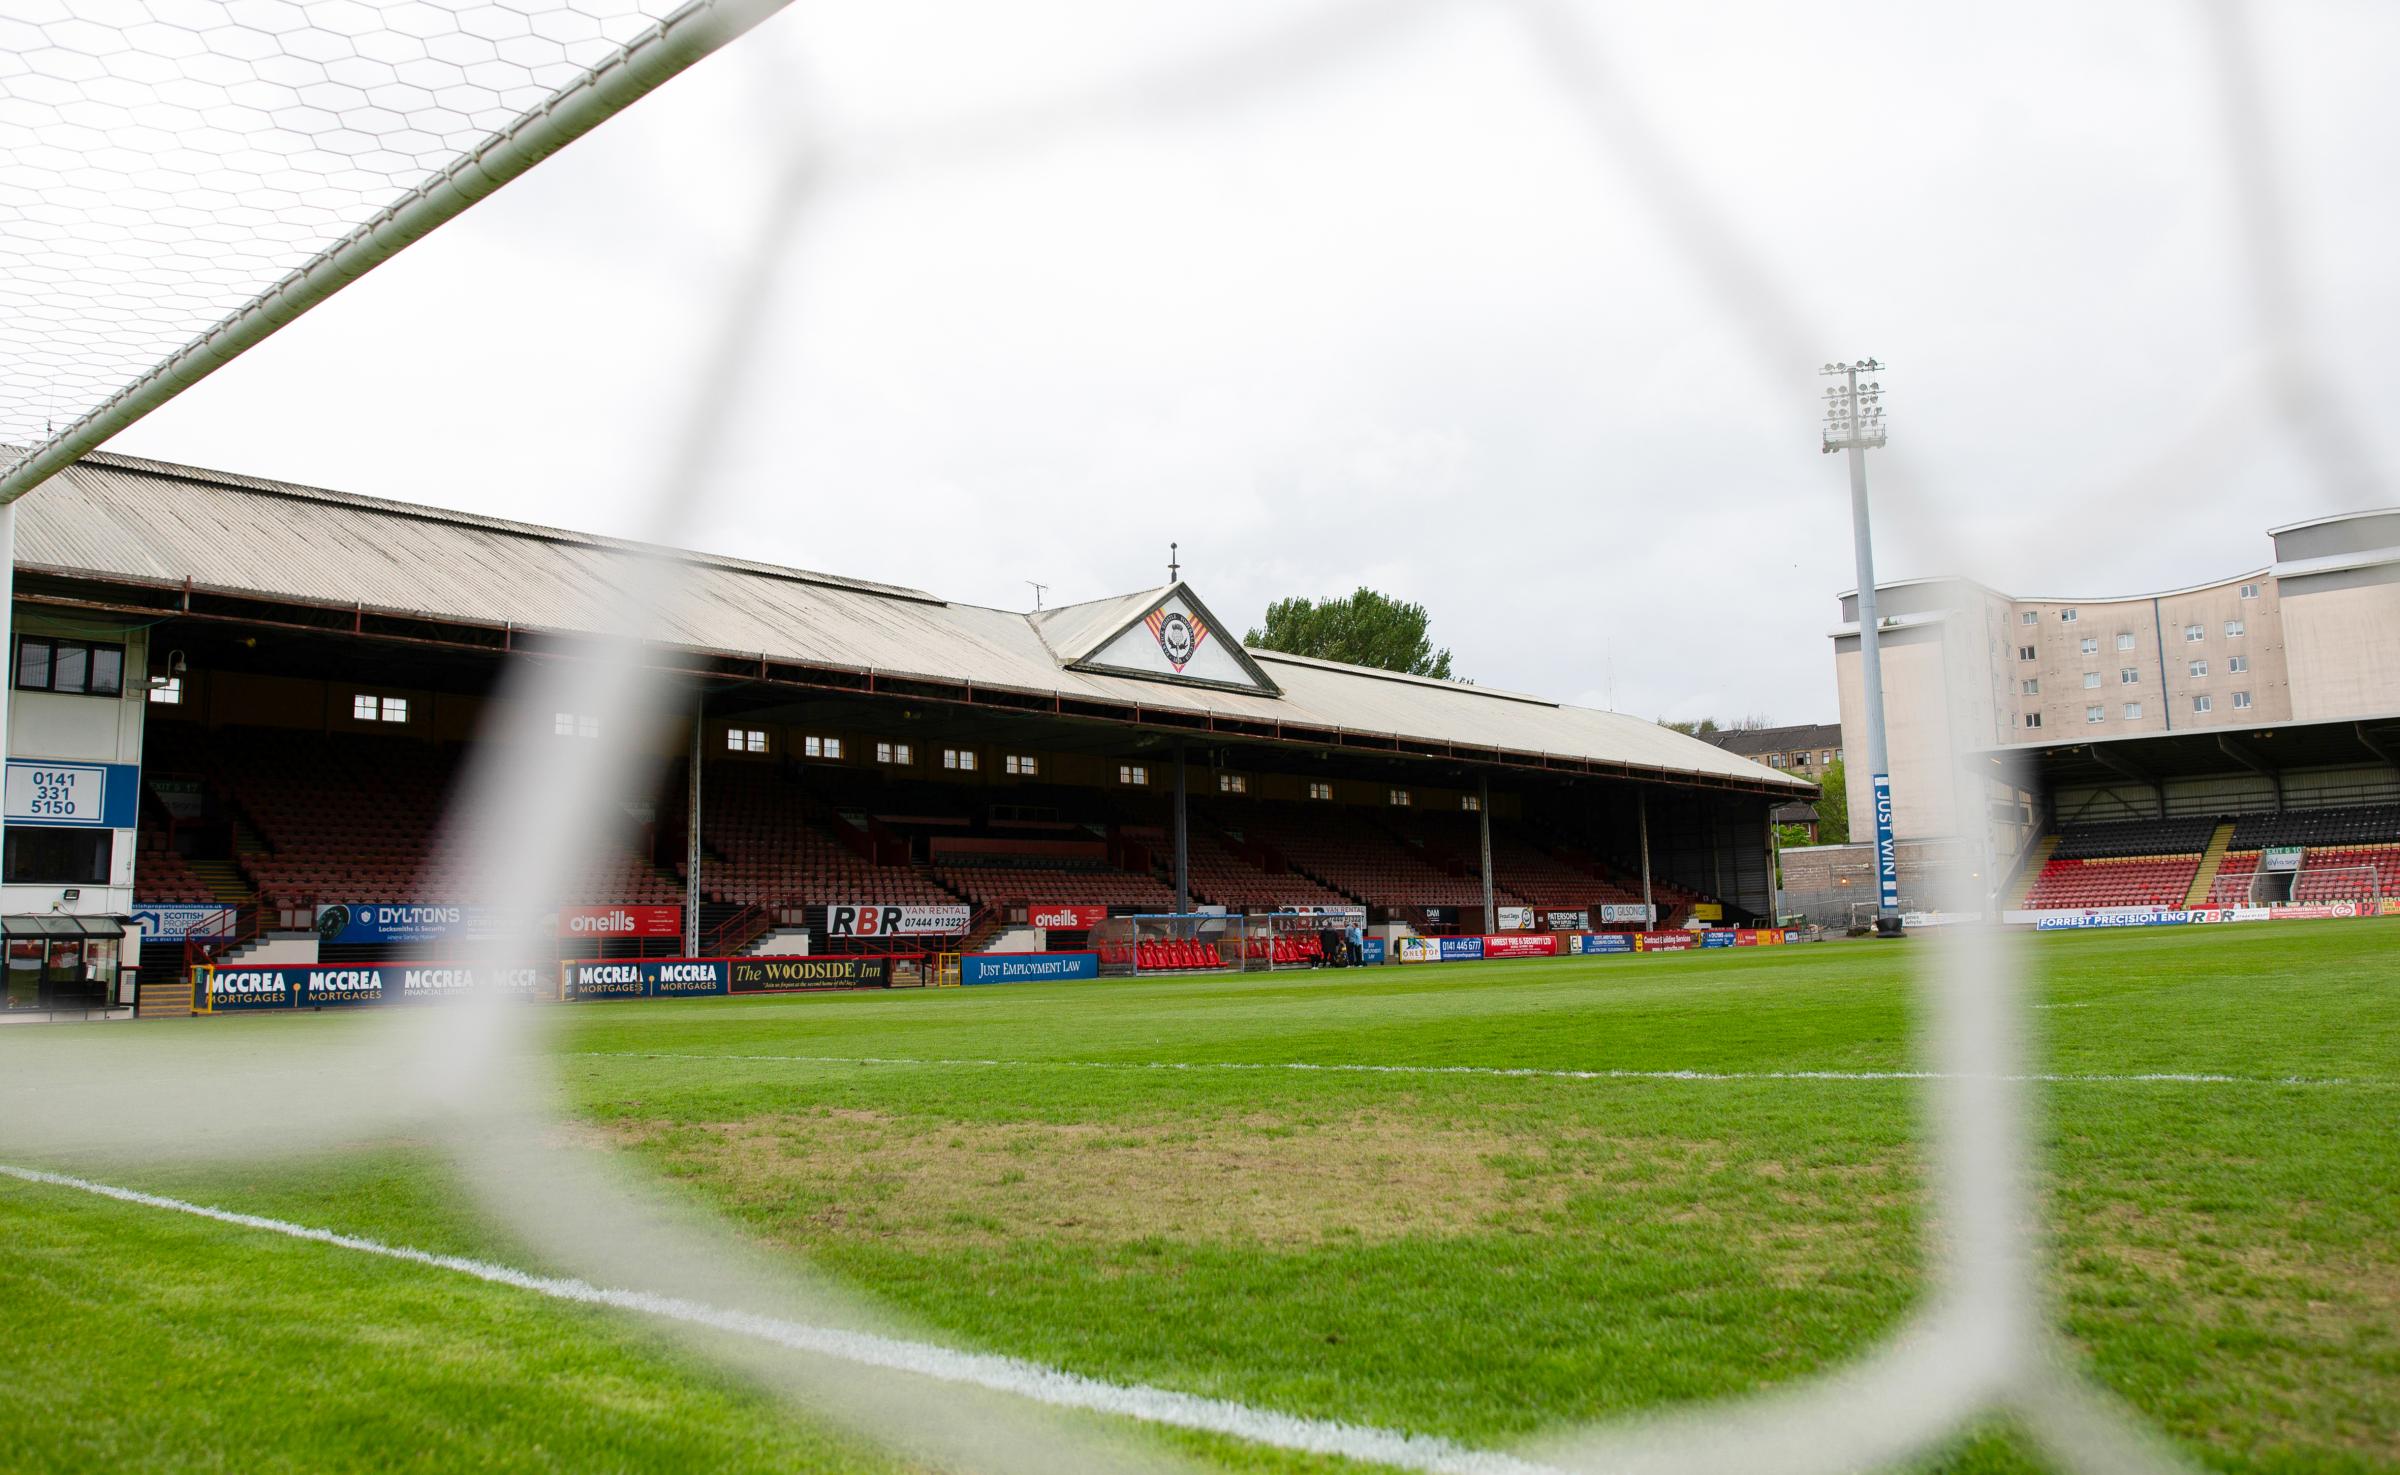 PTFC Trust Q&A: Trustees provide detail on Thistle's move to fan ownership